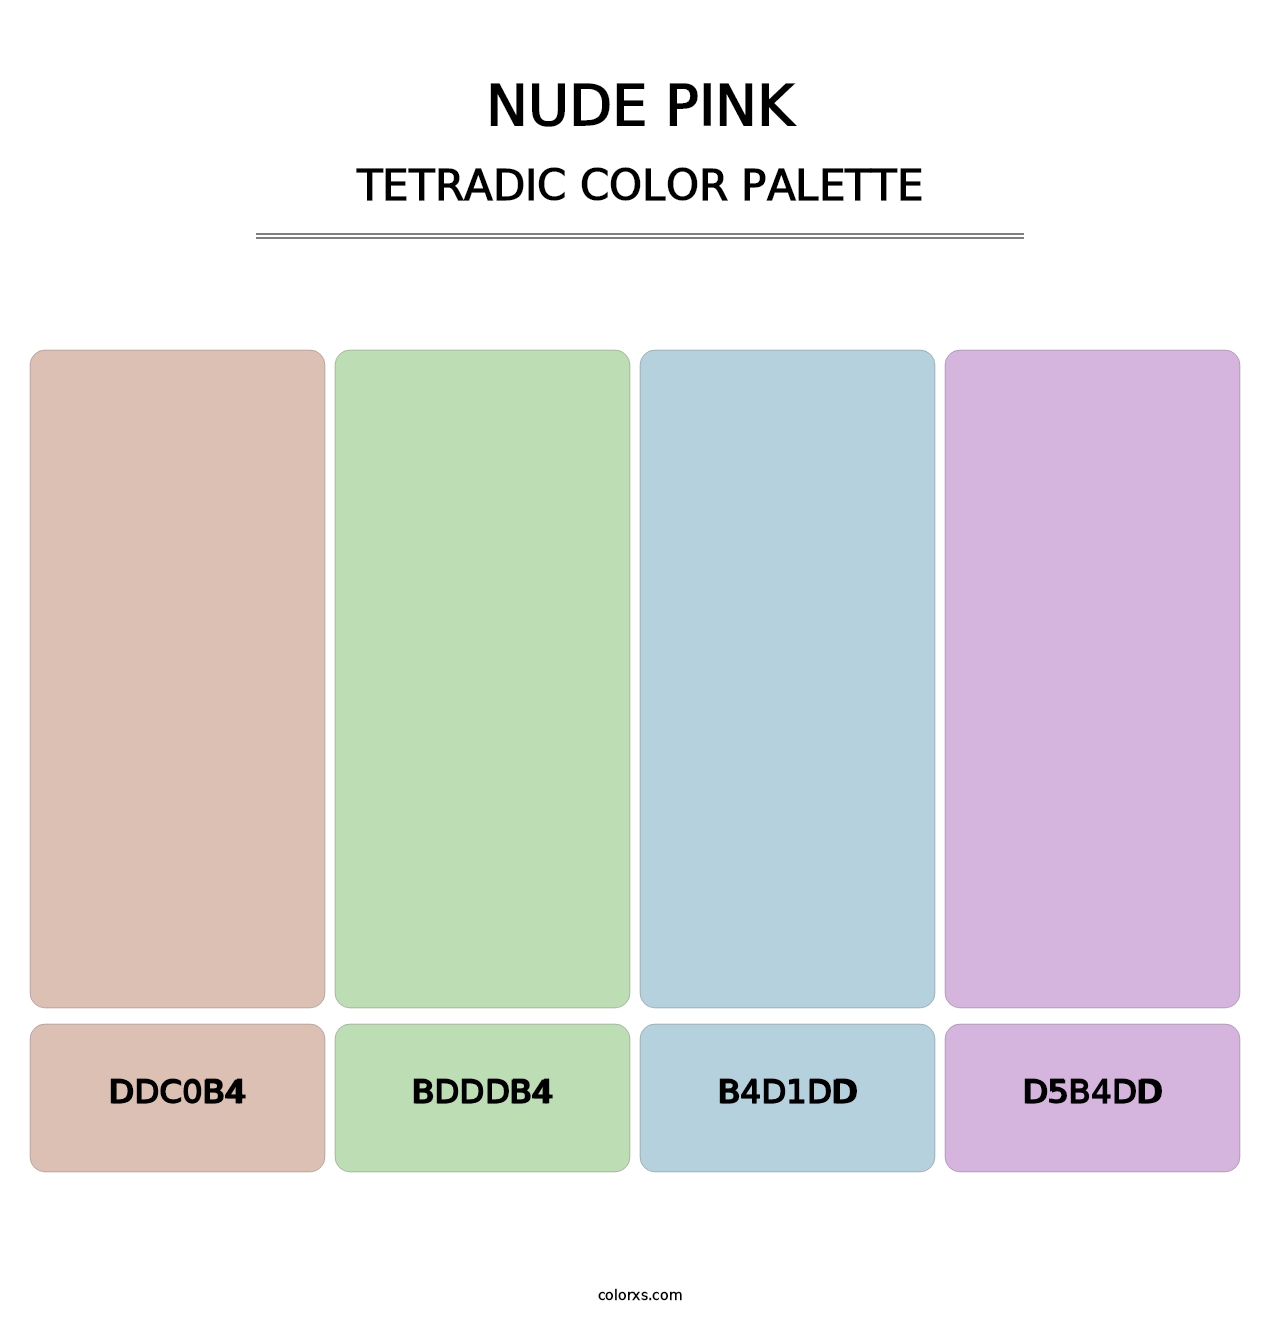 Nude Pink - Tetradic Color Palette